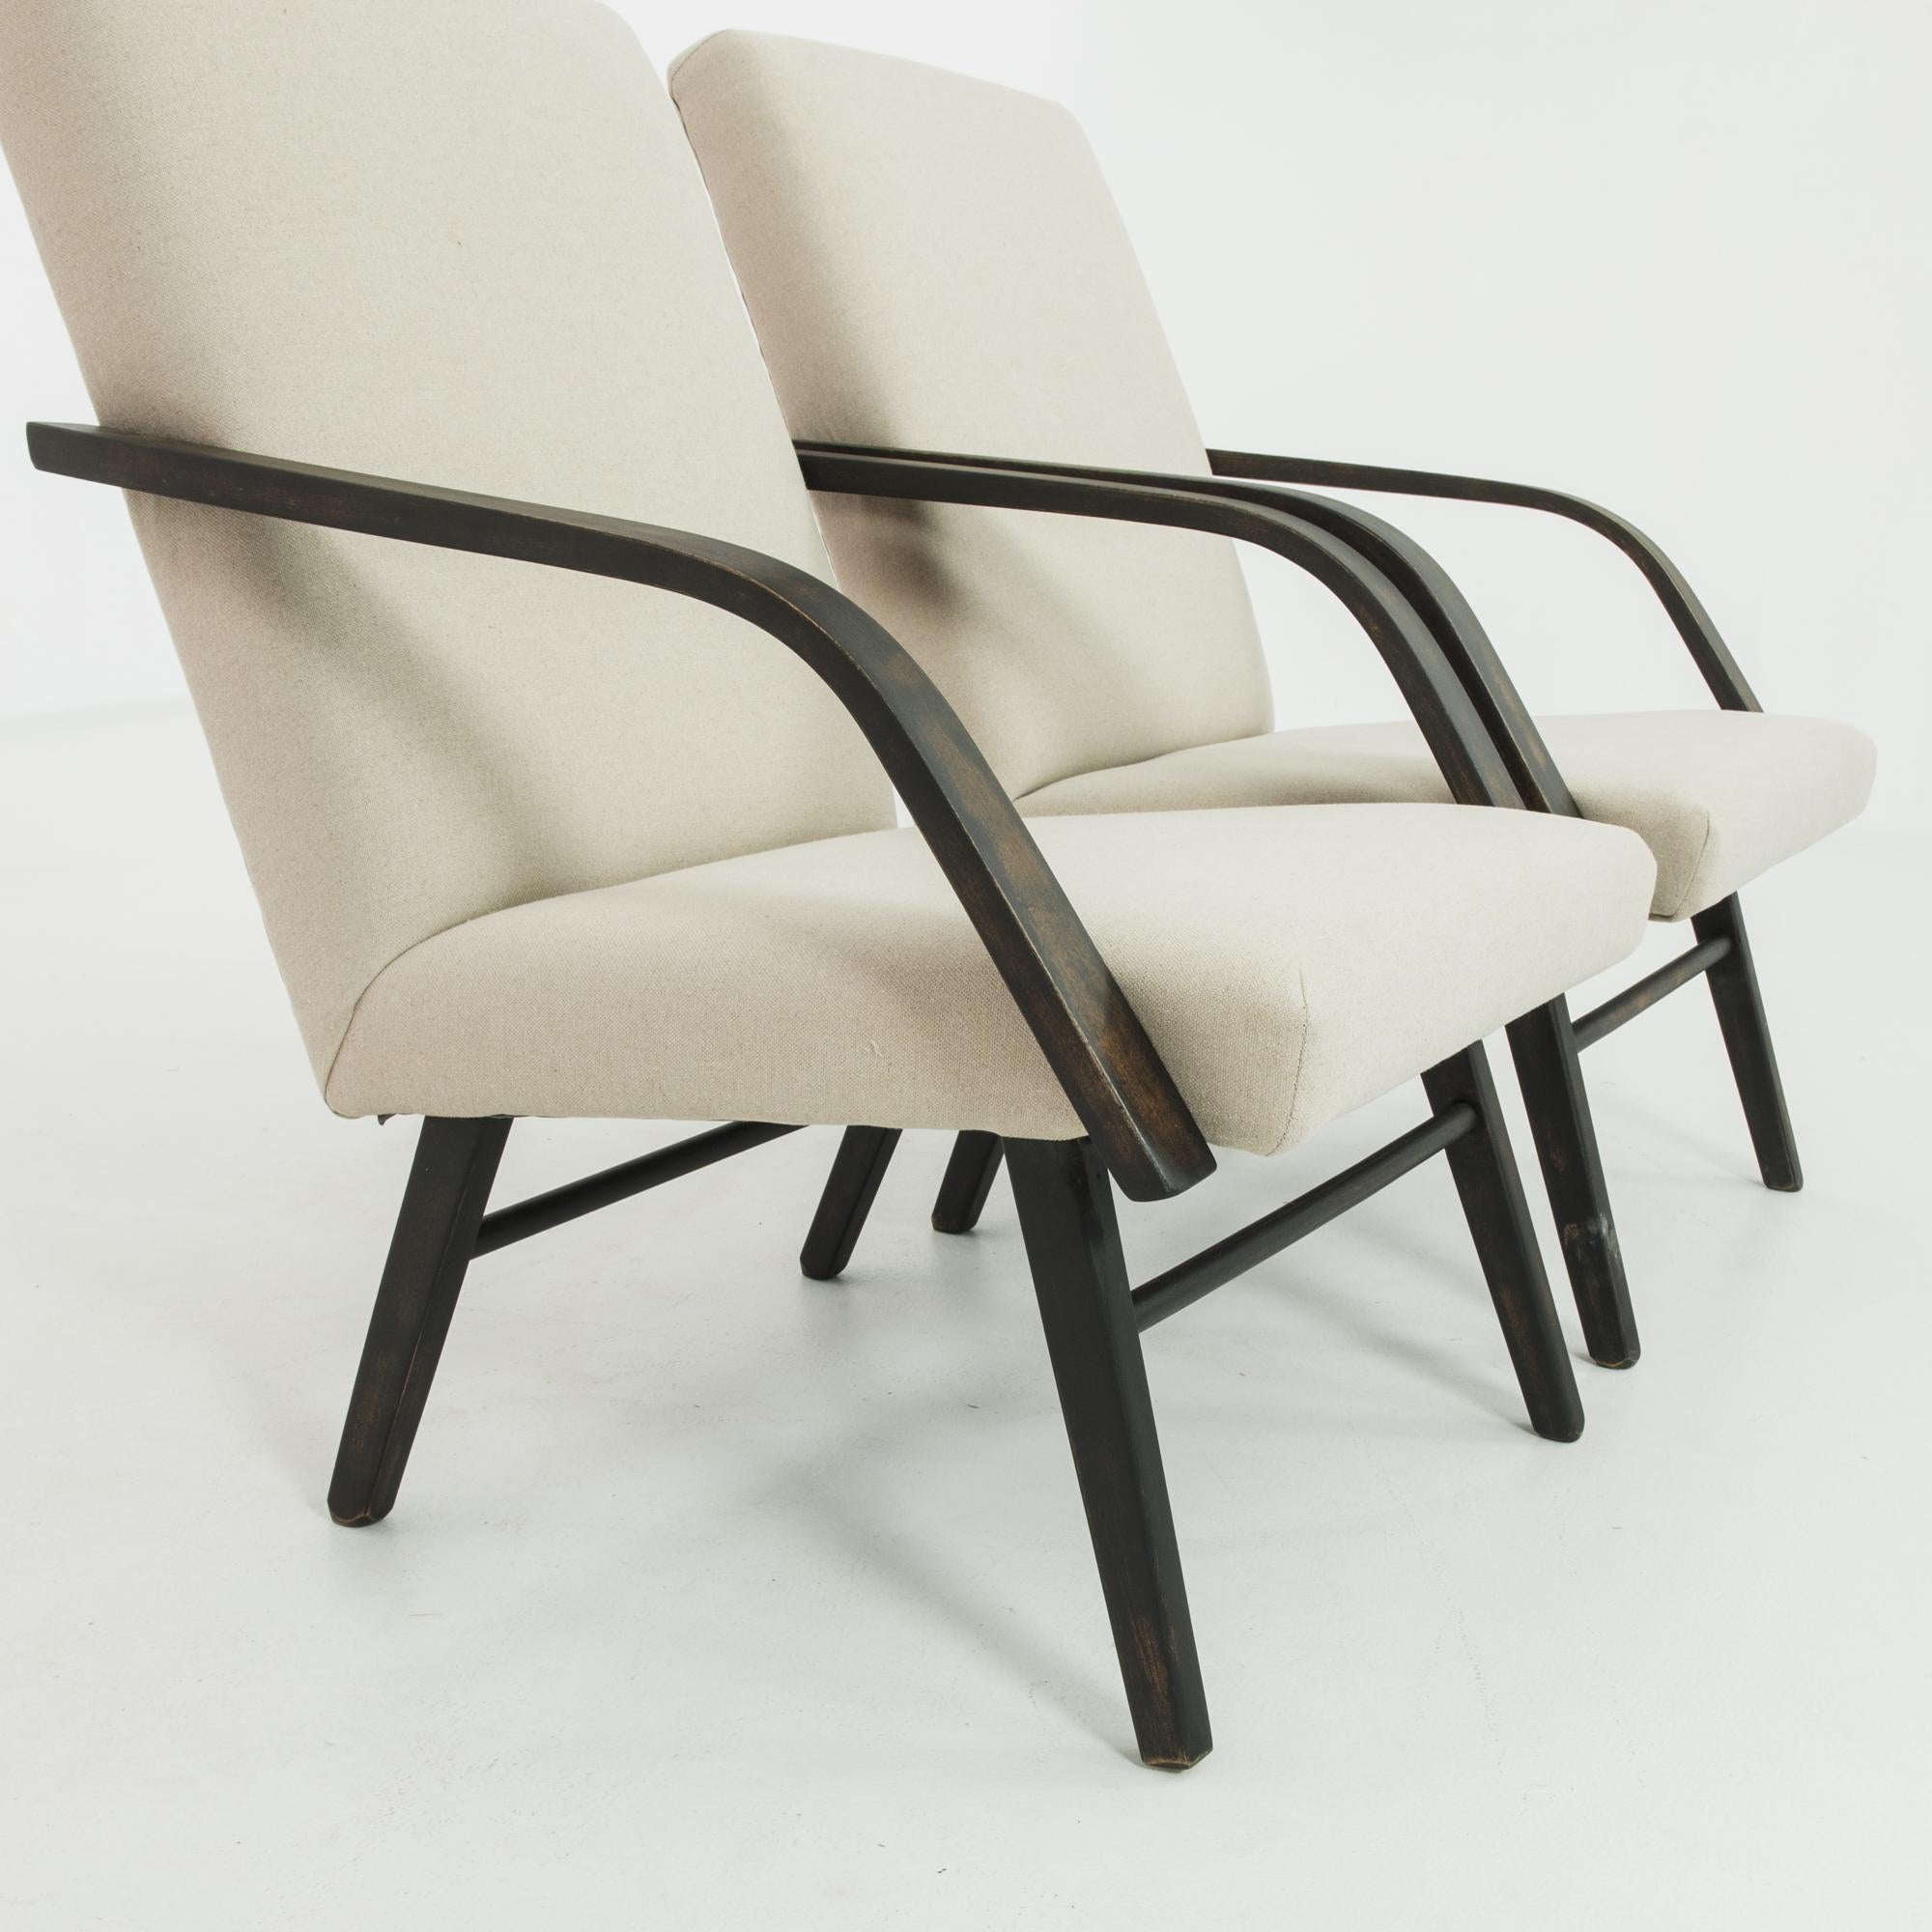 1960s Czechoslovakian Angular Upholstered Lounge Chairs, a Pair For Sale 1